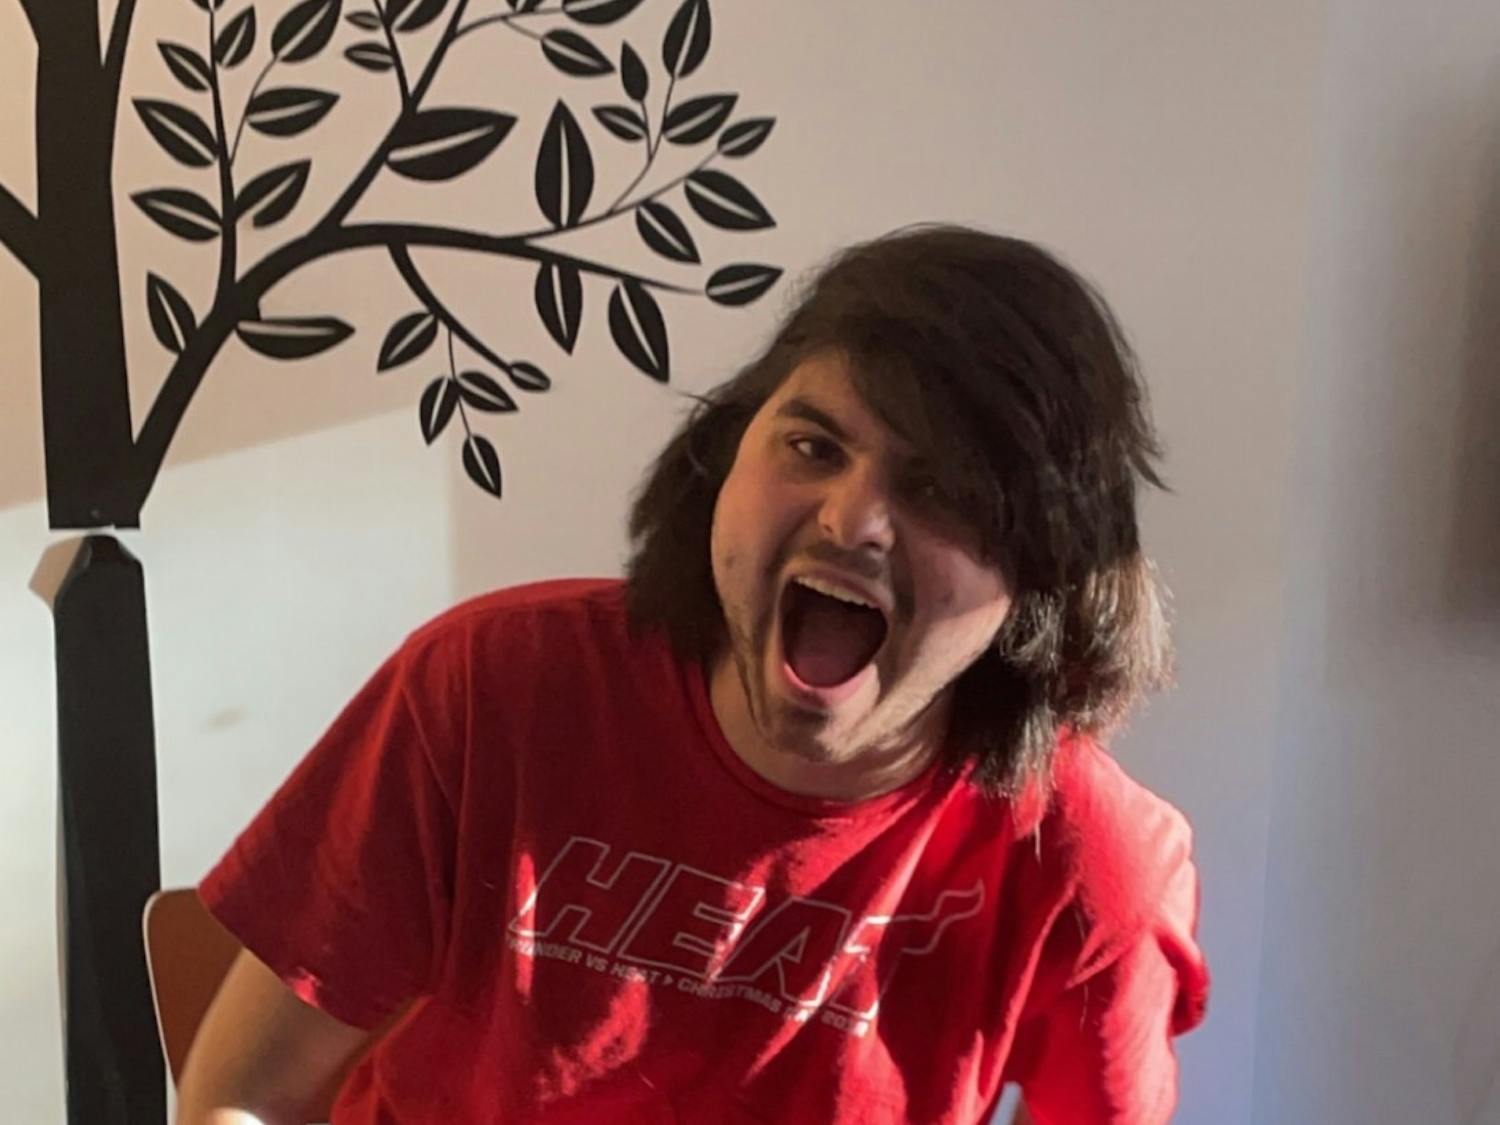 Guillermo Molero is pictured screaming in the flat he stayed in while studying abroad in London, with his signature curly hair straightened for the bit, on Saturday, April 9, 2022.&nbsp;